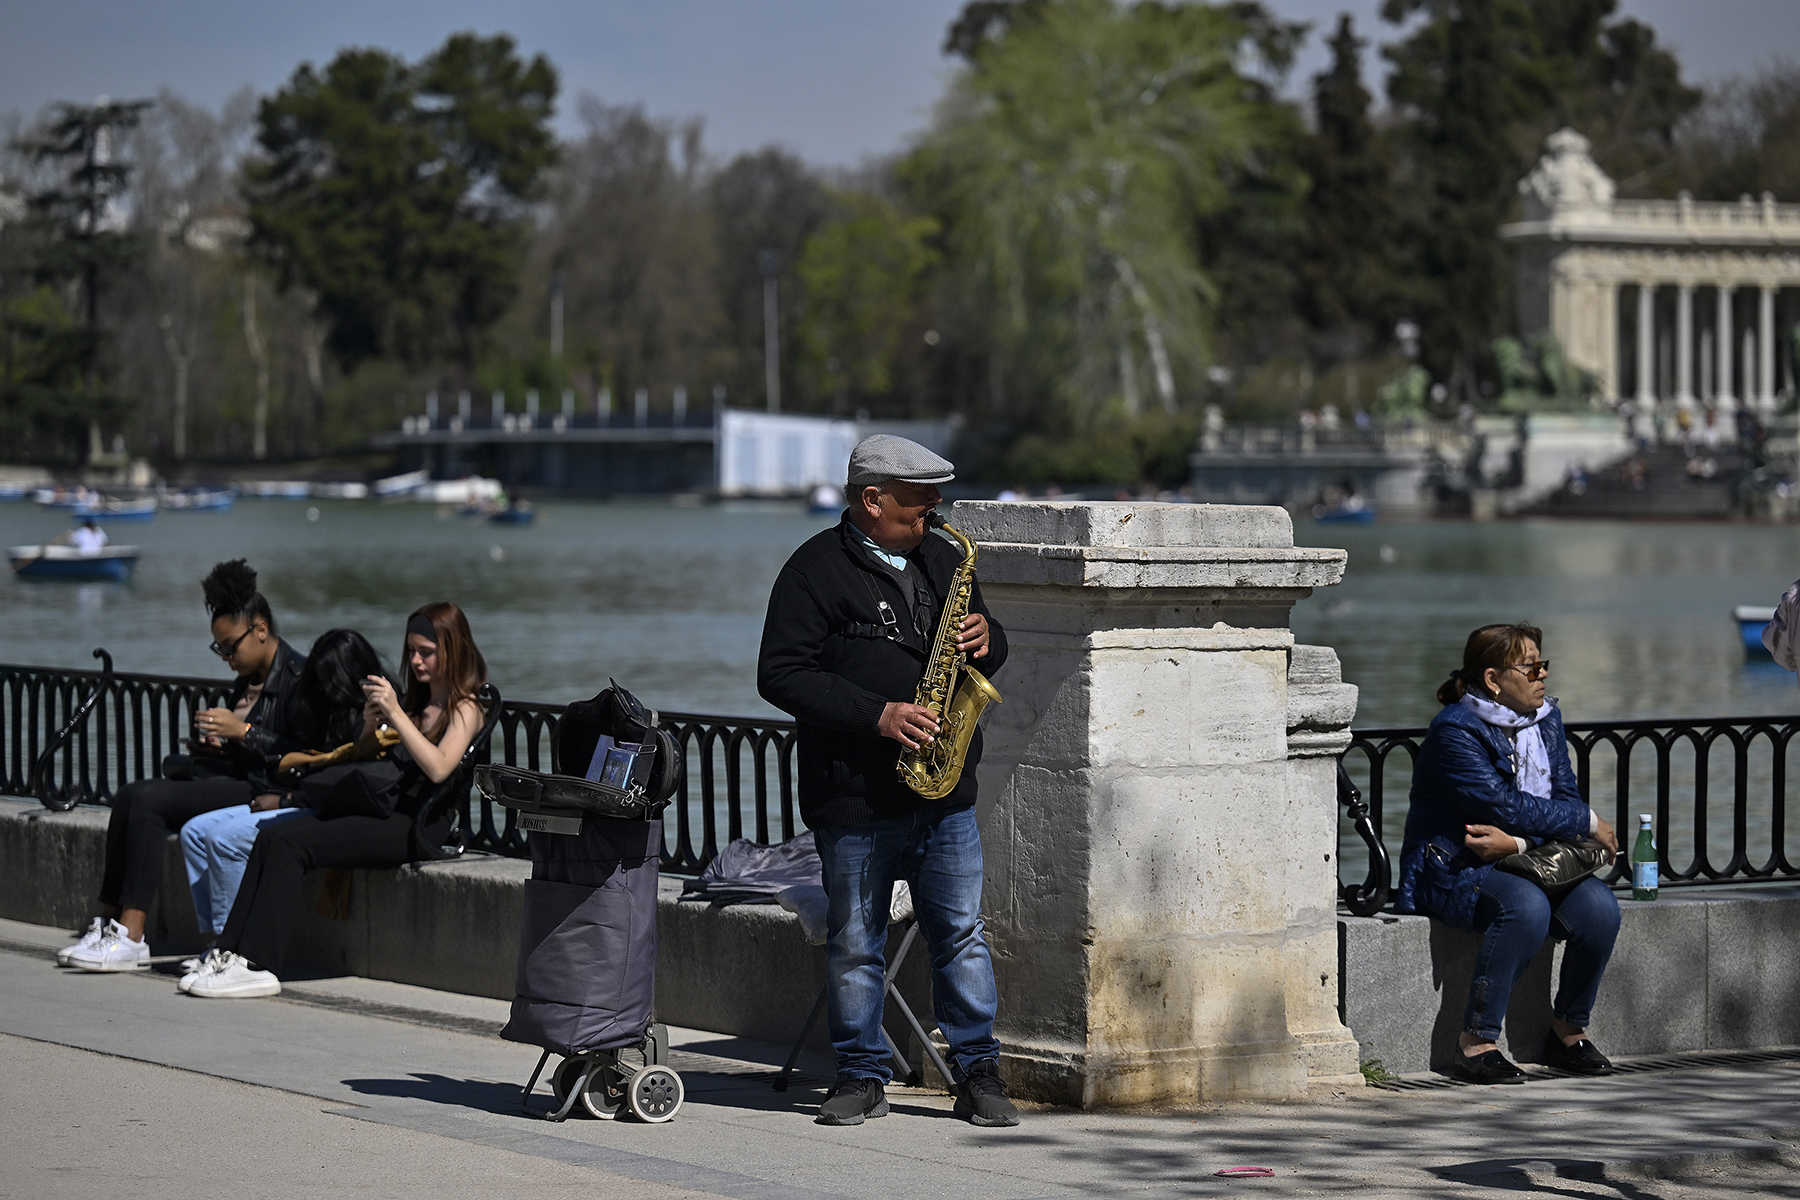 A street musician playing saxophone next to a lake in Parque de Retiro in Madrid on a sunny day